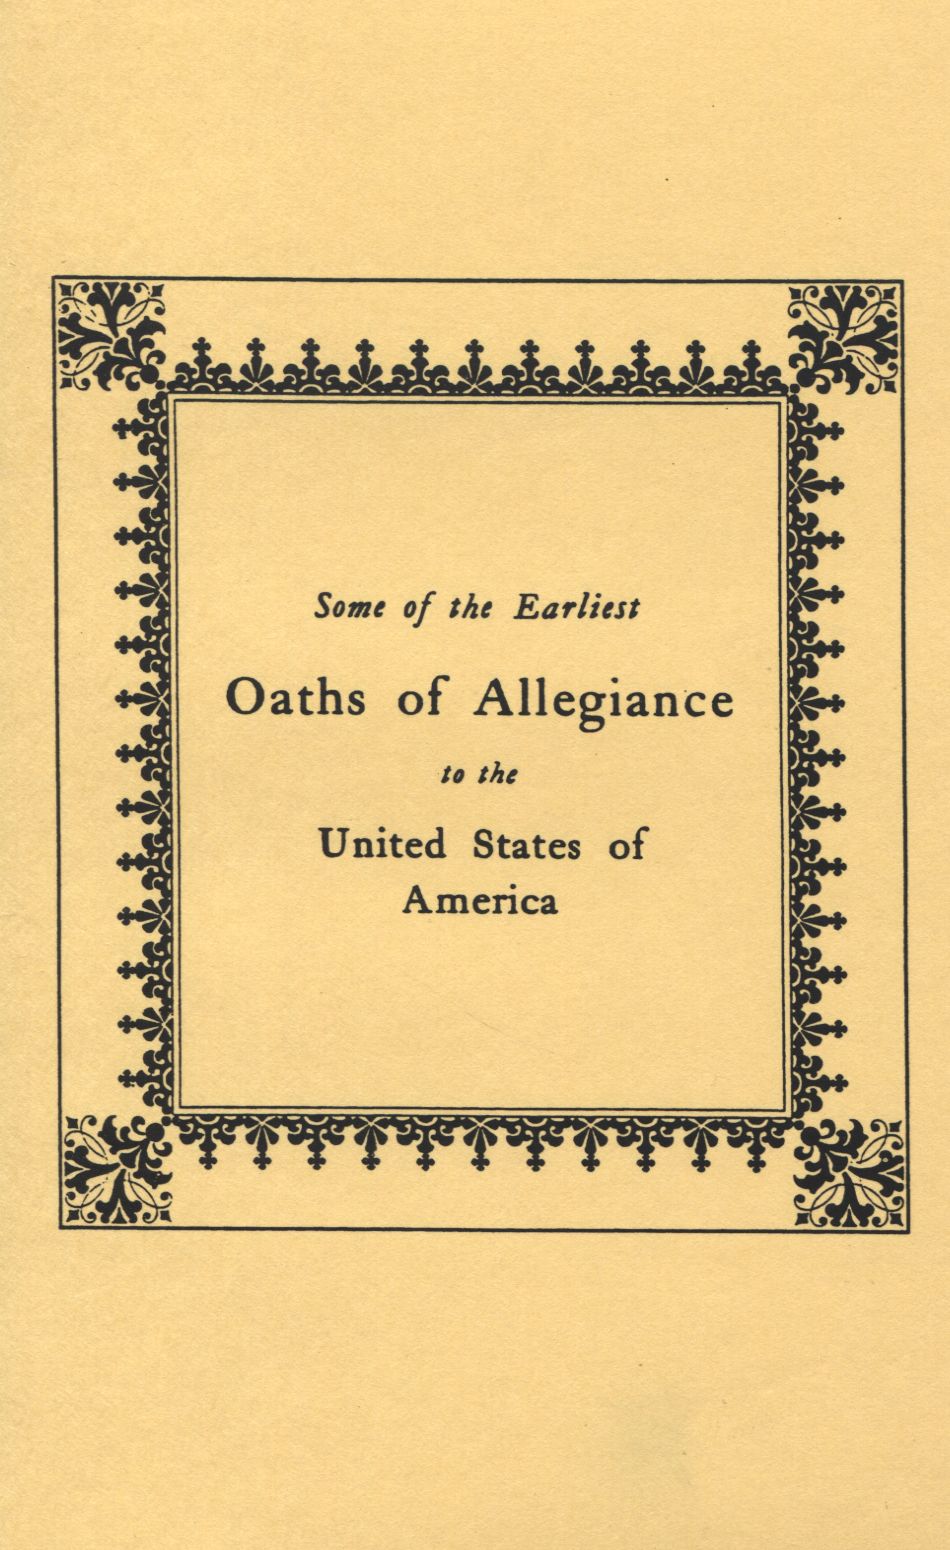 Some of the Earliest Oaths of Allegiance to the United States